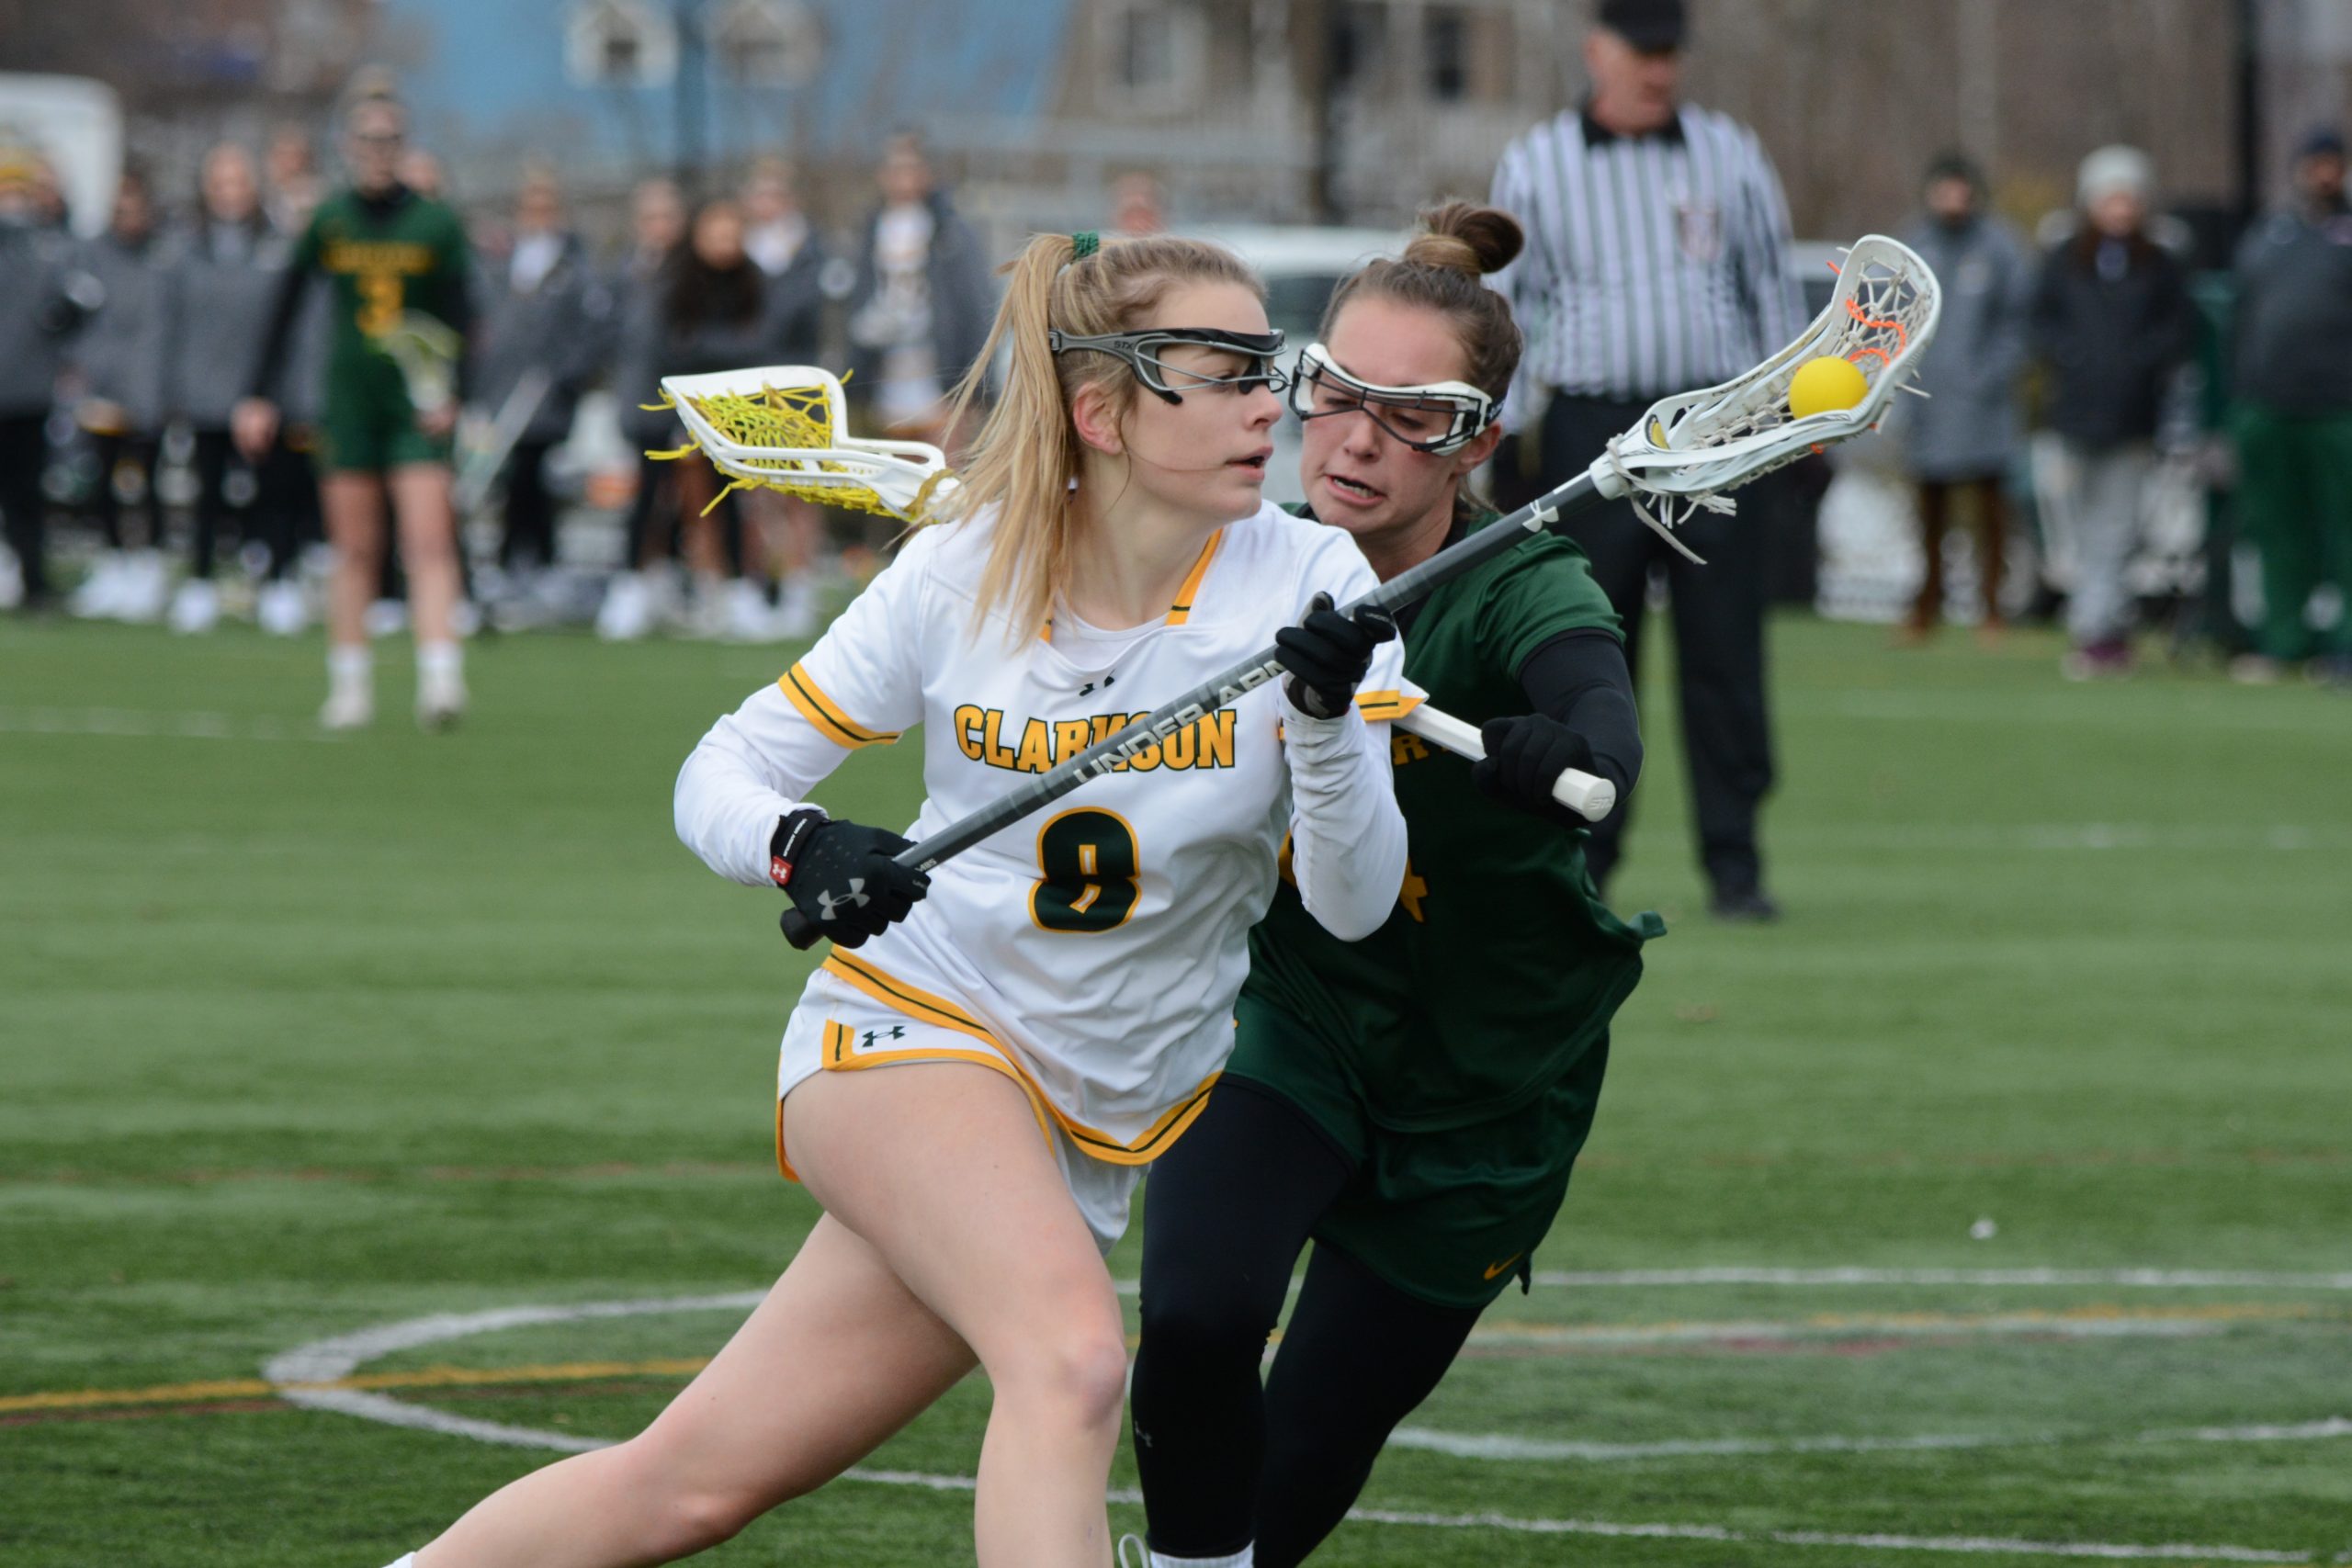 Clarkson student Julia Lavarnway in action against a defender while playing lacrosse on the women's Division III team